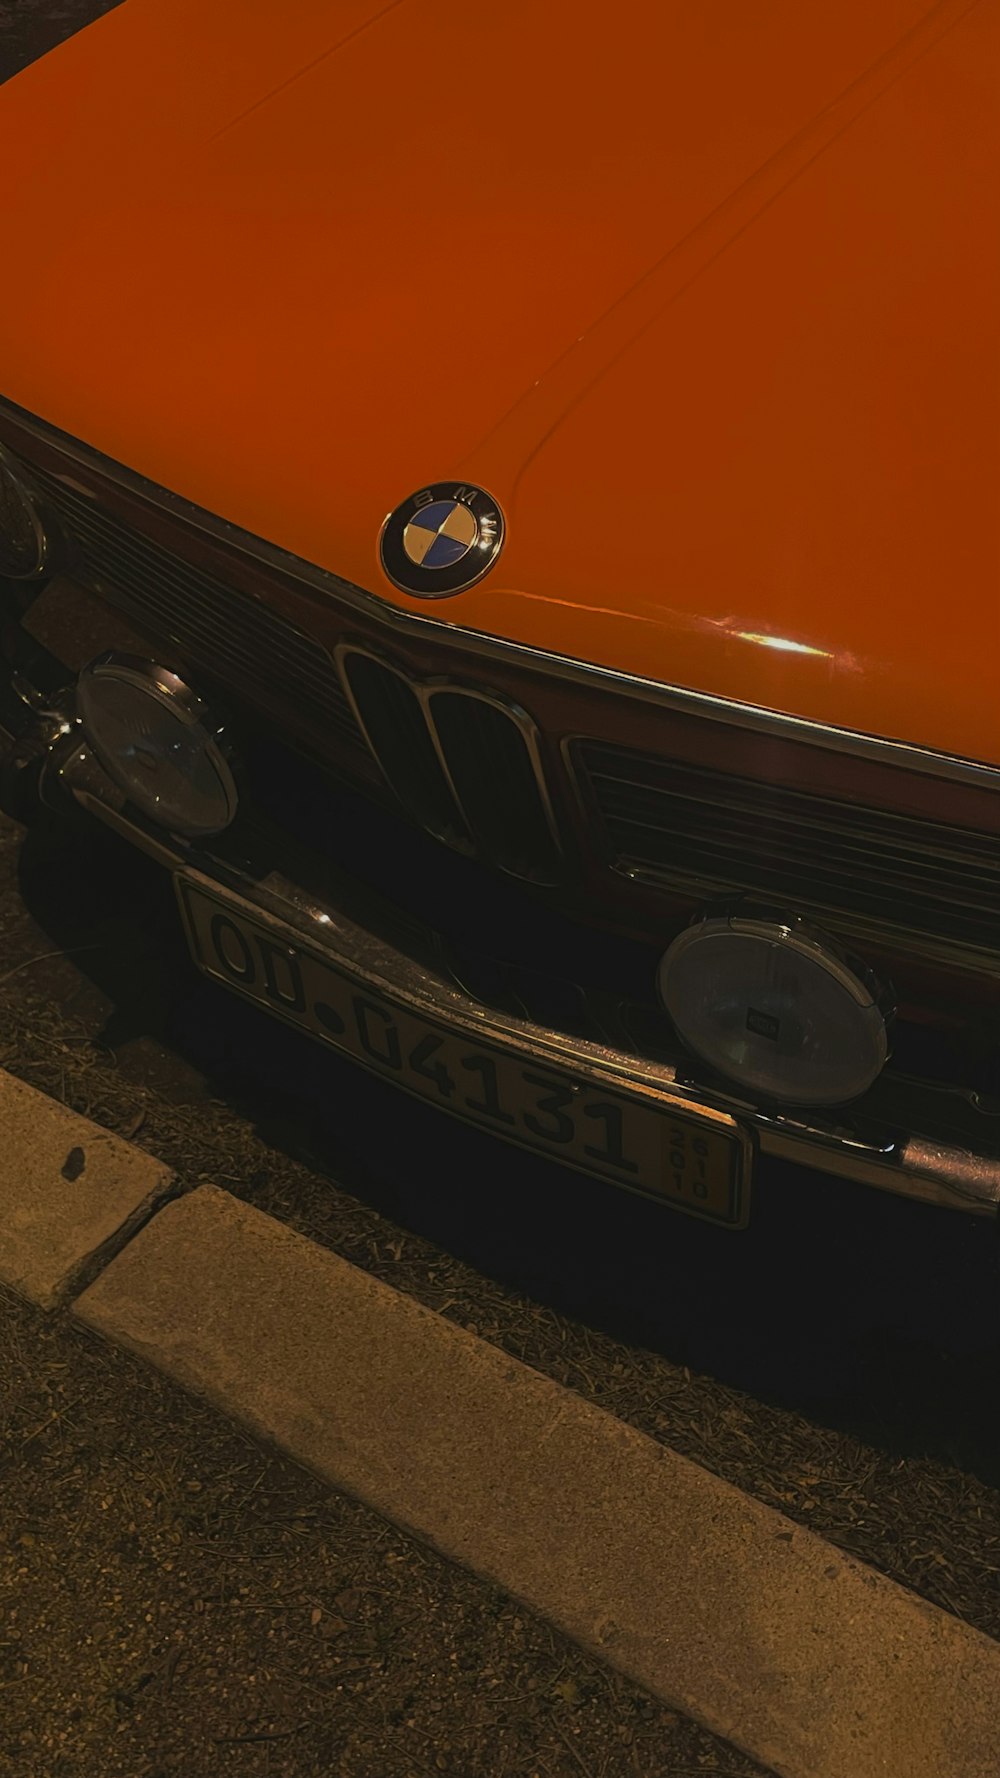 an orange bmw car parked on the side of the road